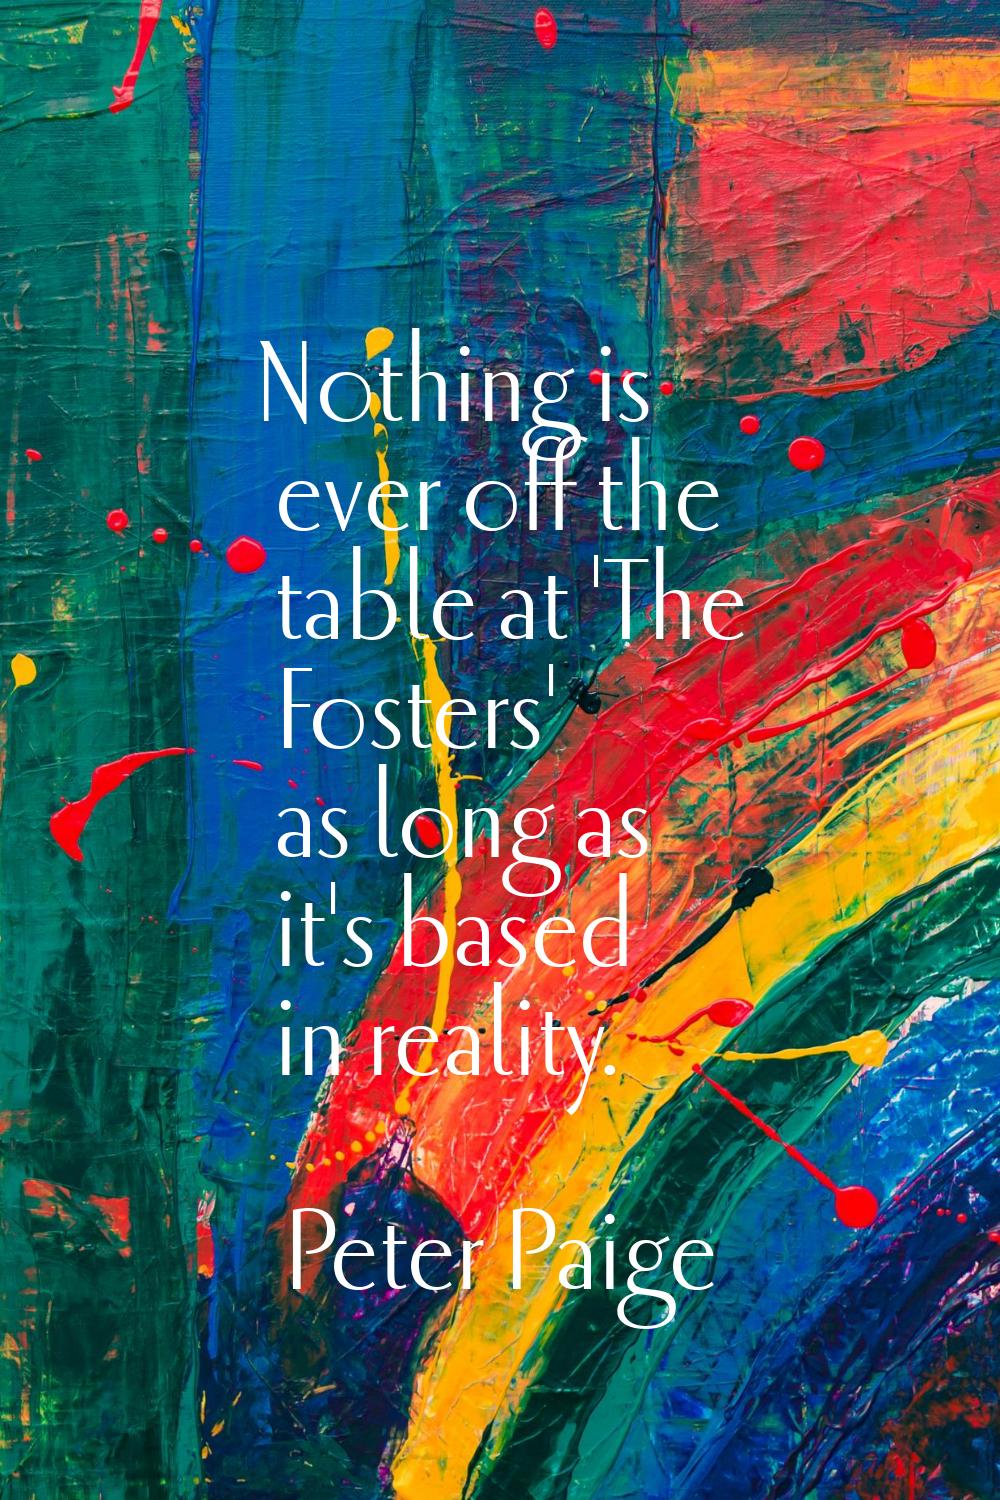 Nothing is ever off the table at 'The Fosters' as long as it's based in reality.